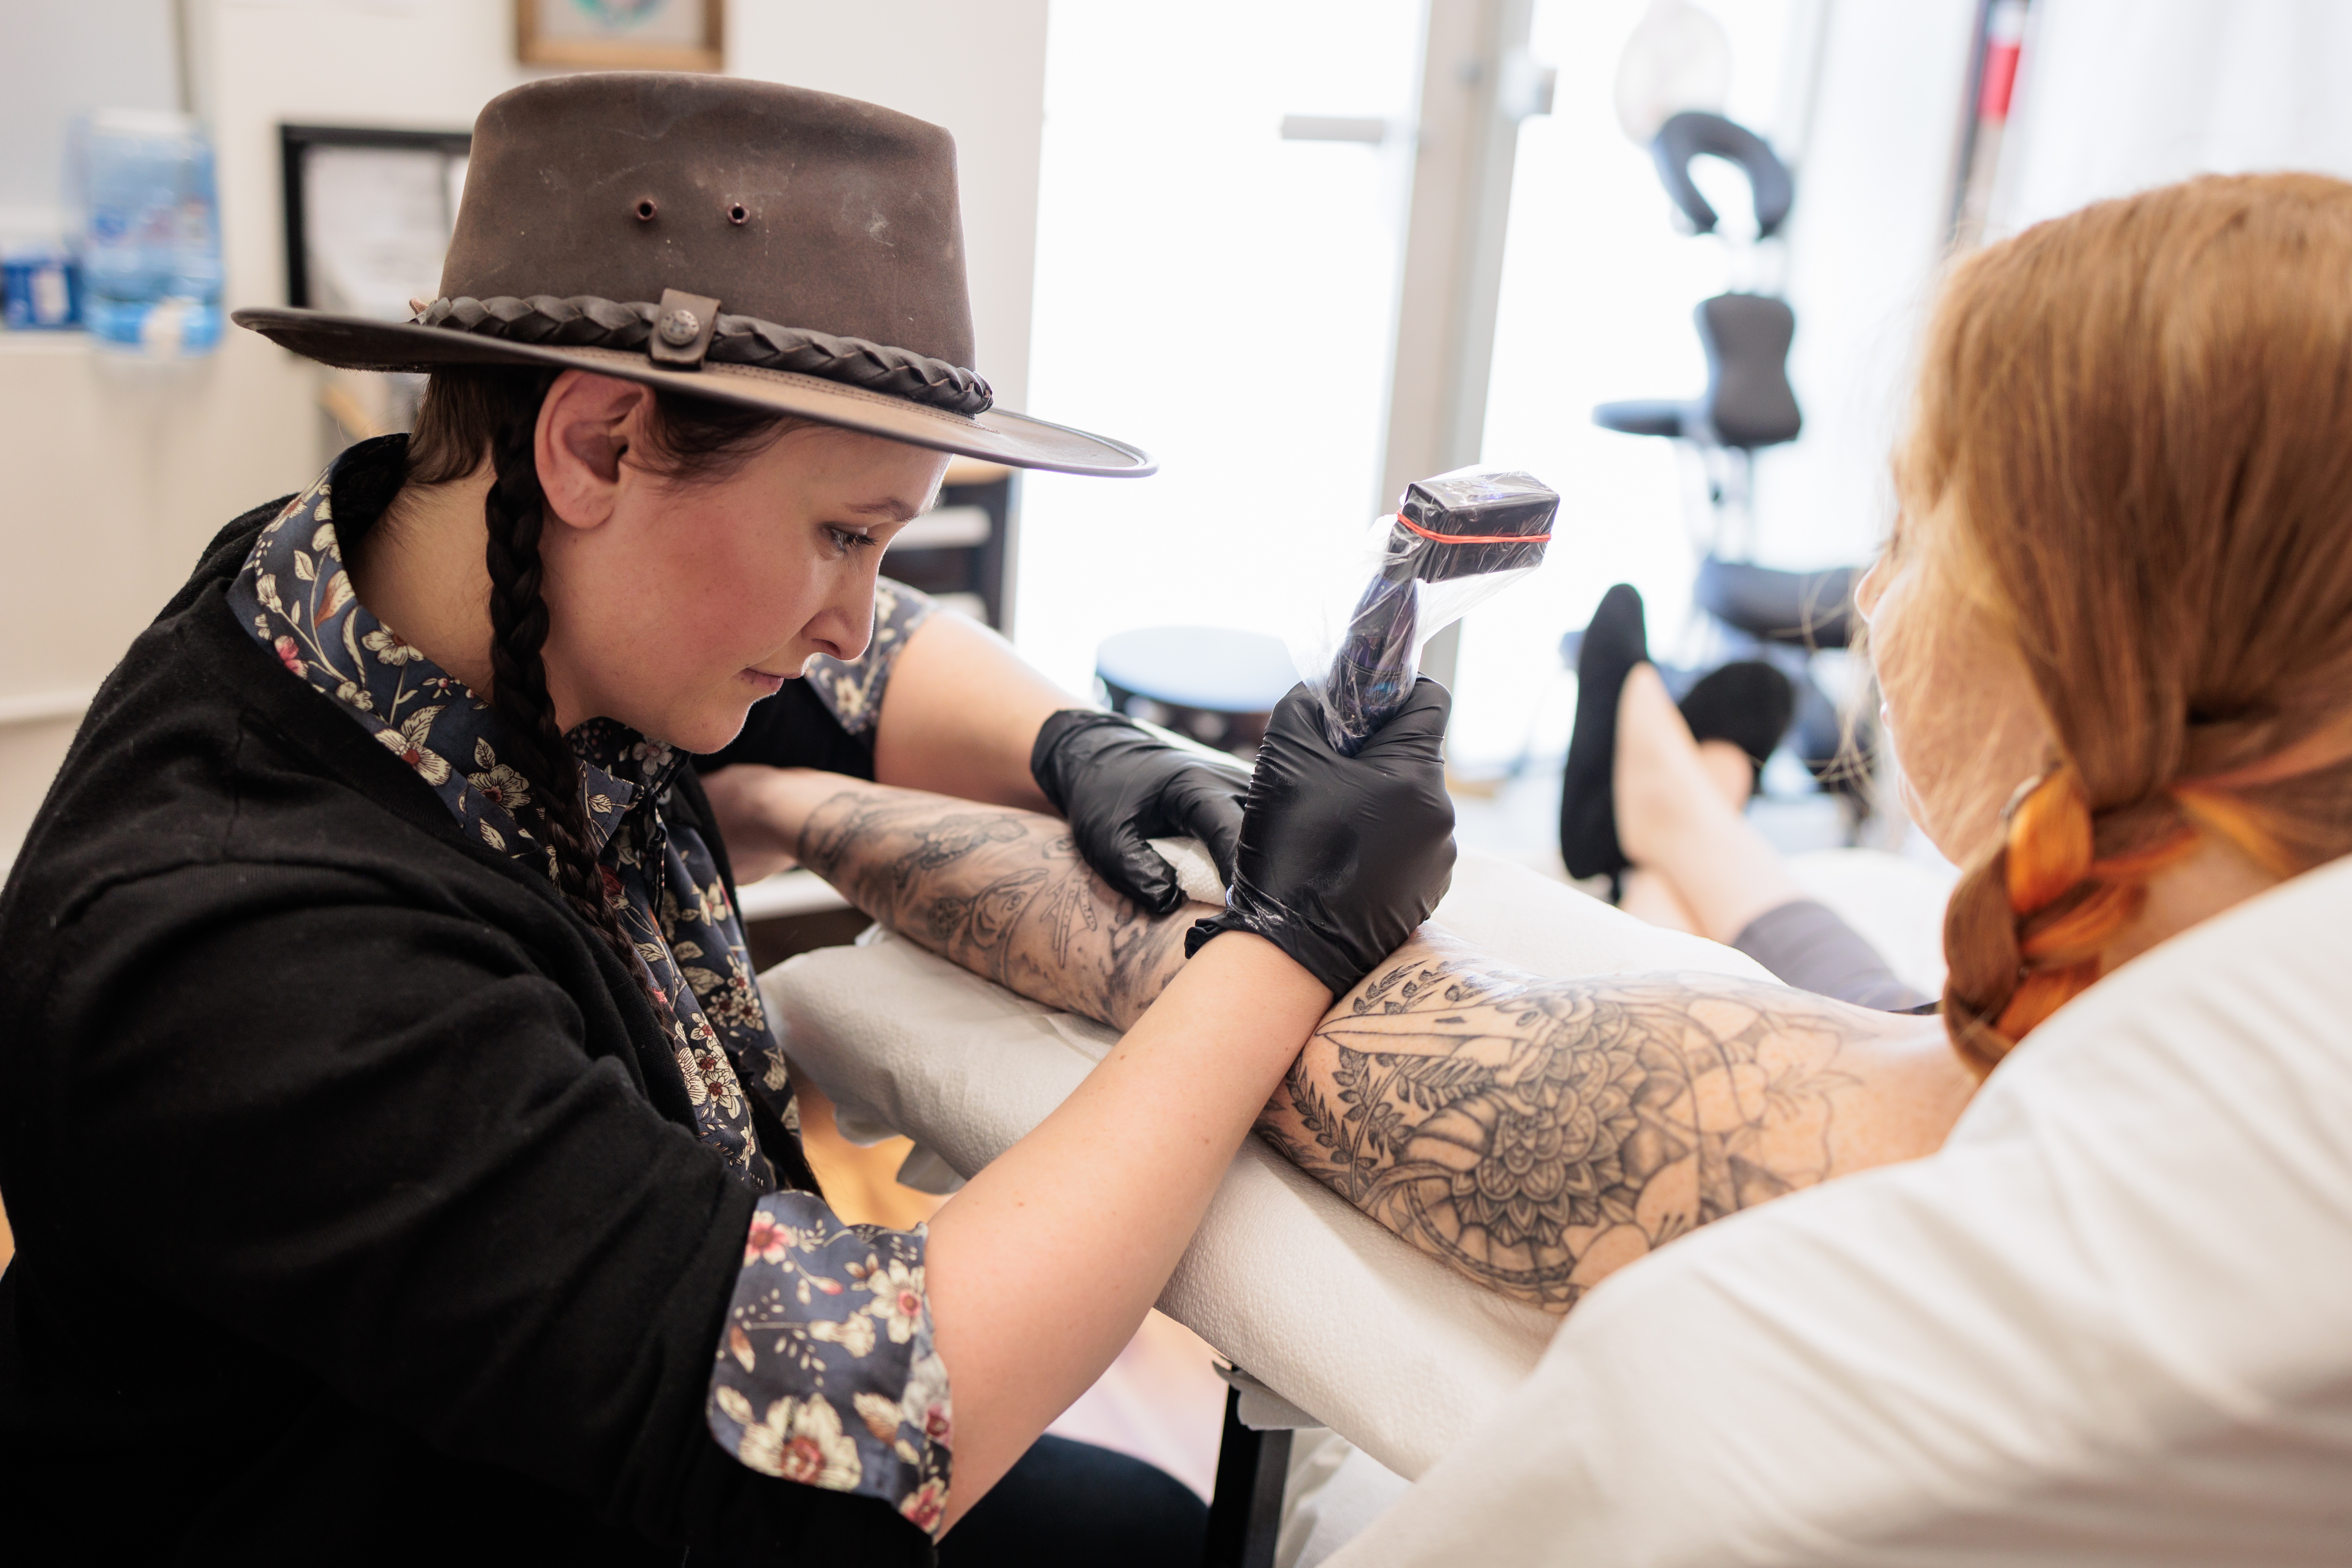 The art of tattooing on 'an ever-changing canvas' - The Boston Globe